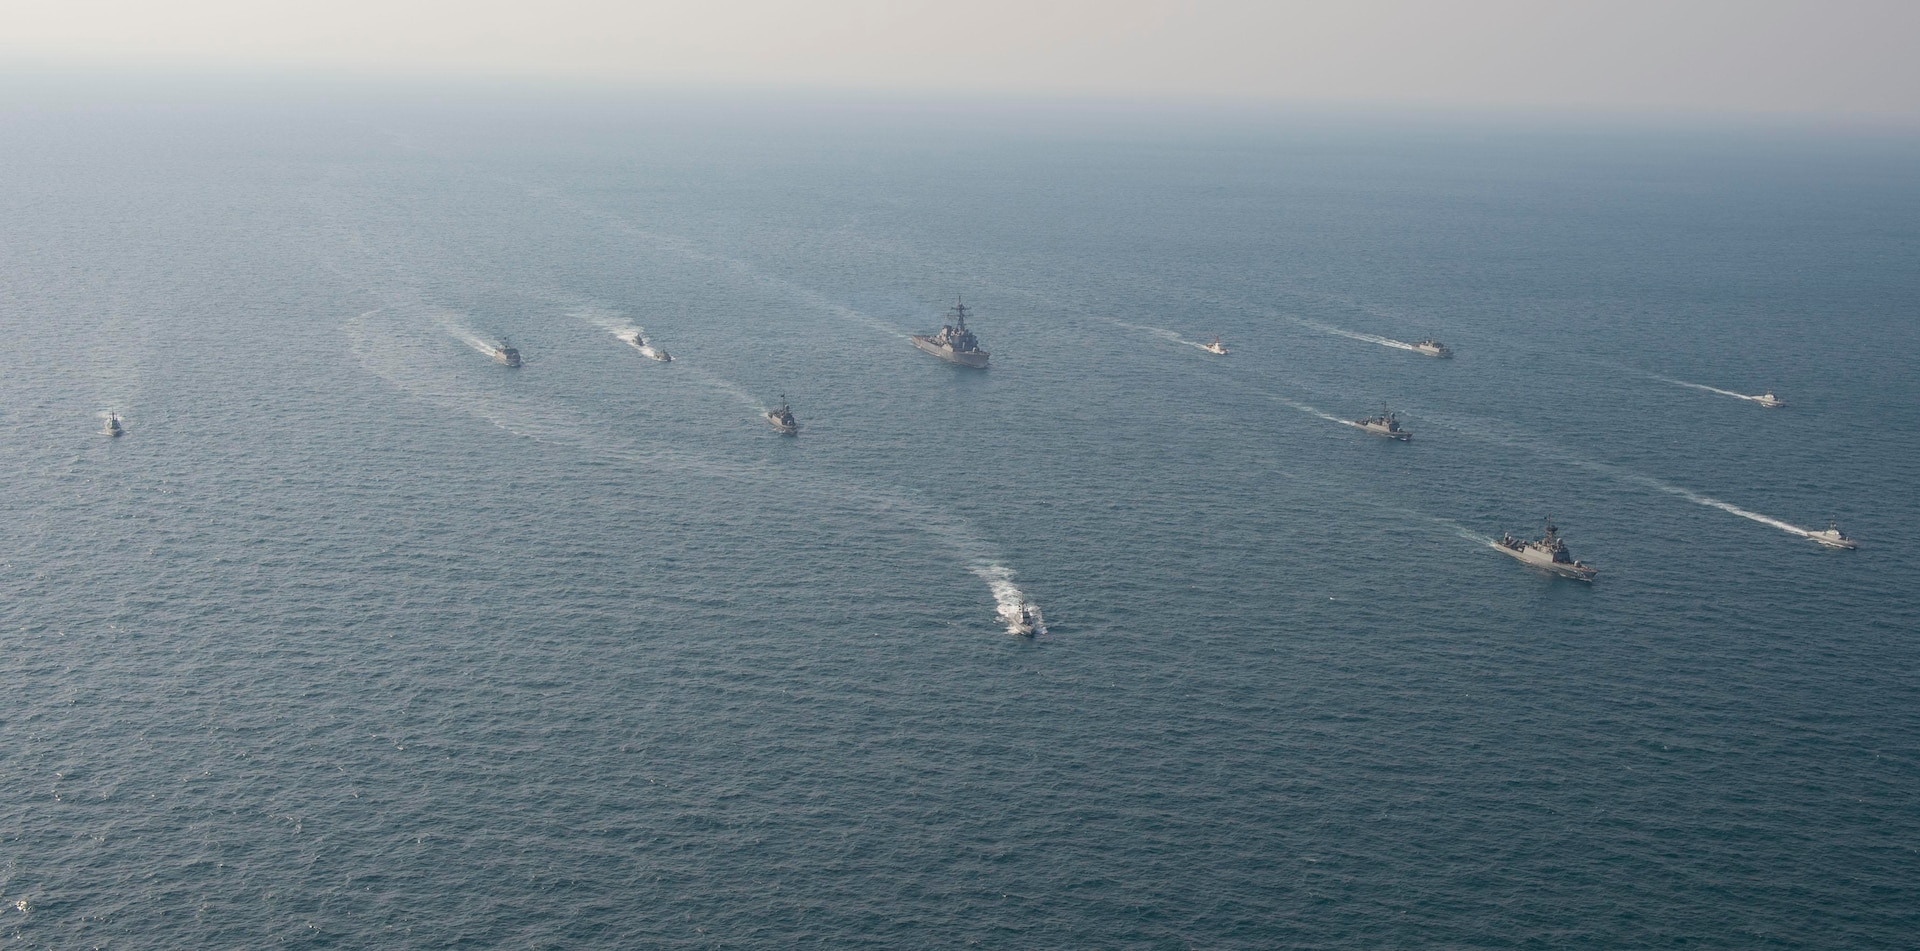 210124-N-XG173-1526 ARABIAN GULF (Jan. 24, 2021) Royal Saudi Naval Force ships and U.S. Navy sail in formation during exercise Nautical Defender (ND) 21 in the Arabian Gulf, Jan. 24. ND 21 is the capstone in a series of multi-national maritime security exercises designed to broaden levels of cooperation, support long-term regional security, and enhance military-to-military interoperability between the Kingdom of Saudi Arabia, UK and the U.S. (U.S. Navy photo by Mass Communication Specialist 2nd Class Aja Bleu Jackson)